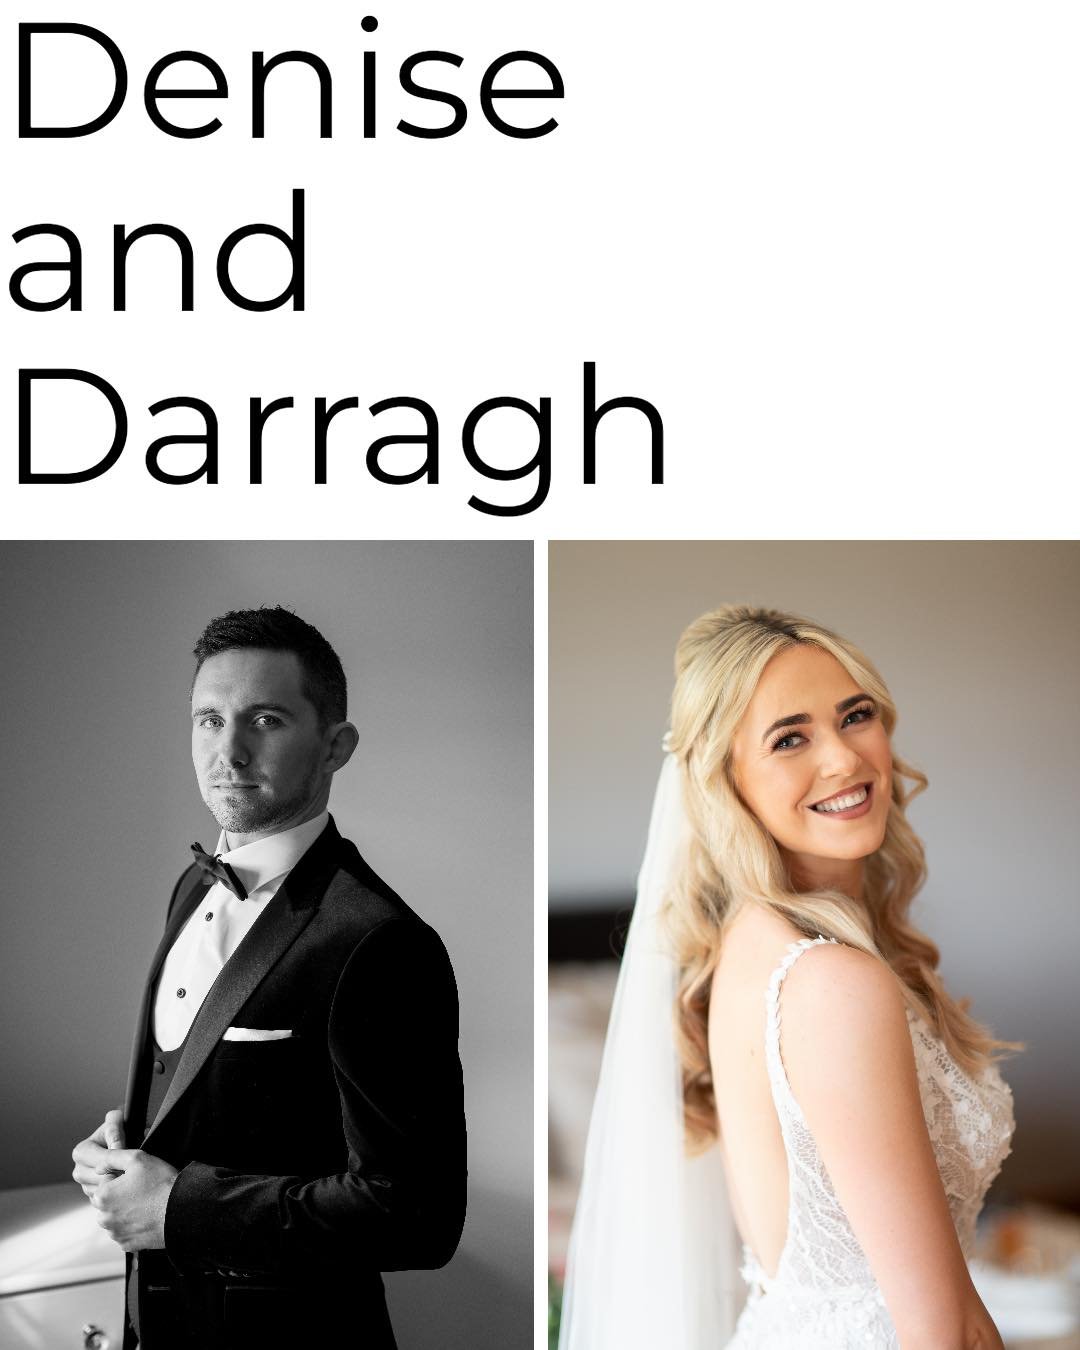 Denise and Darragh.

The Sun shined brightly for Denise and Darragh&rsquo;s lovely wedding in Ballyliffin Lodge Hotel last weekend. 
We made our way up to the highest point at Alpaca Ireland to take in the stunning views before making our way to the 